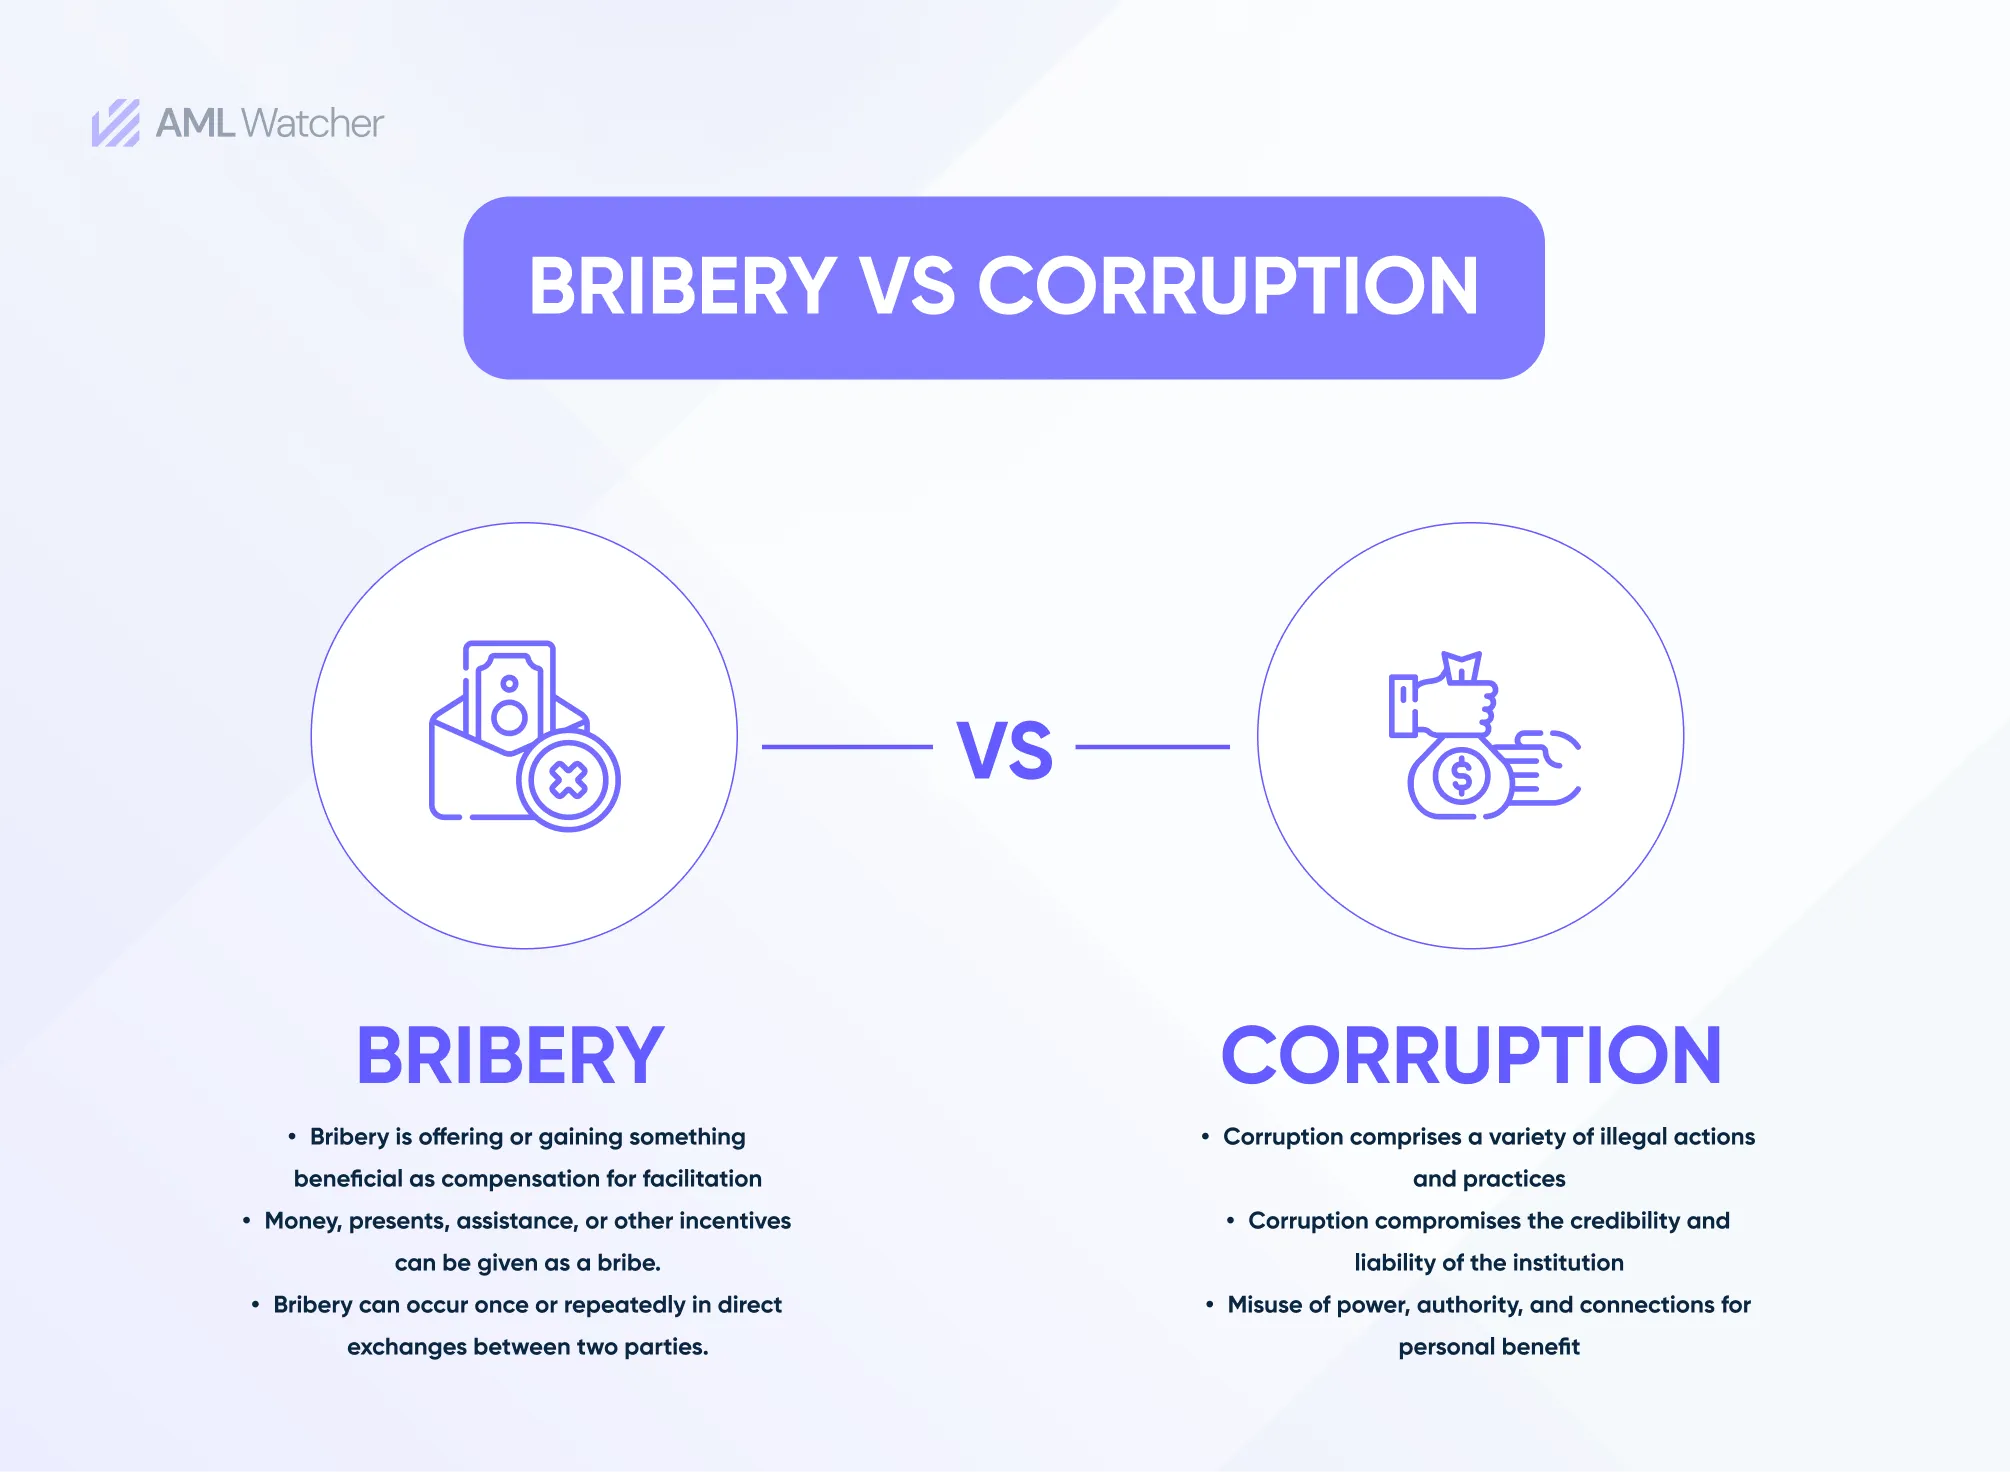 Difference between Bribery and Corruption